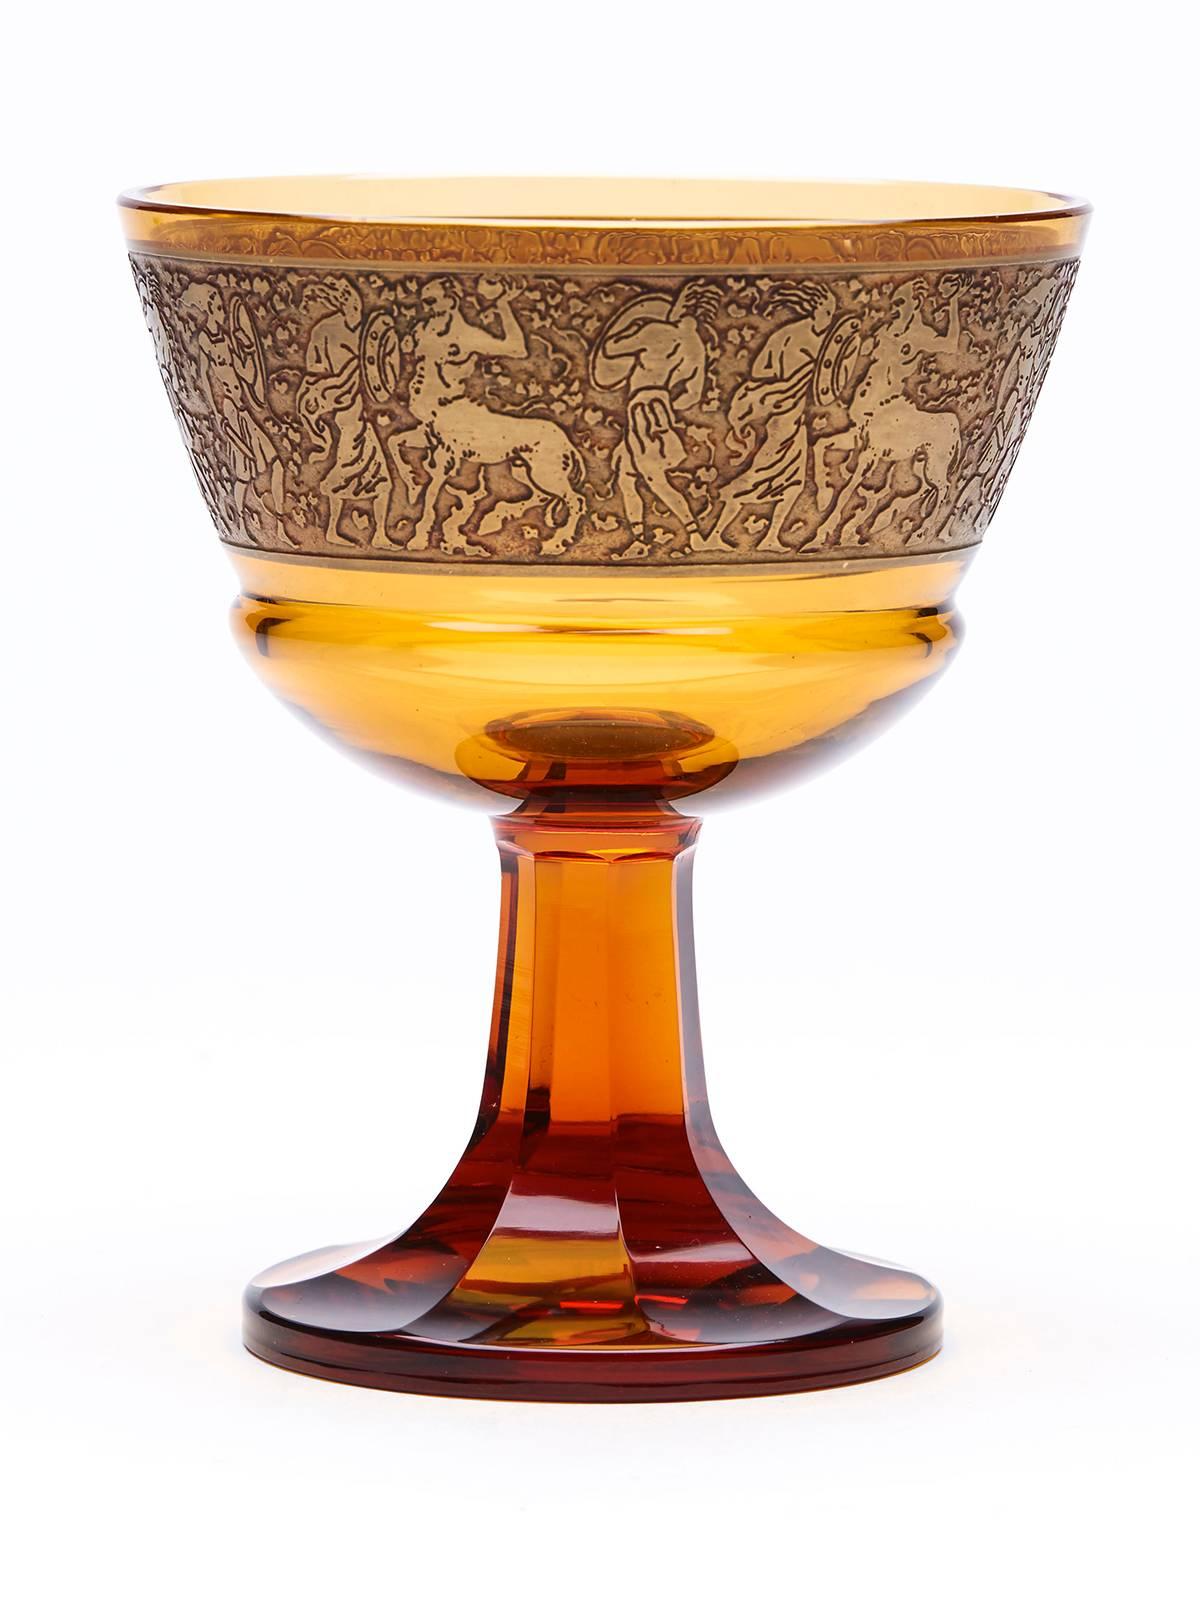 Early 20th Century Moser Acid Etched Classical Figure Amber Glass Bowl, circa 1920